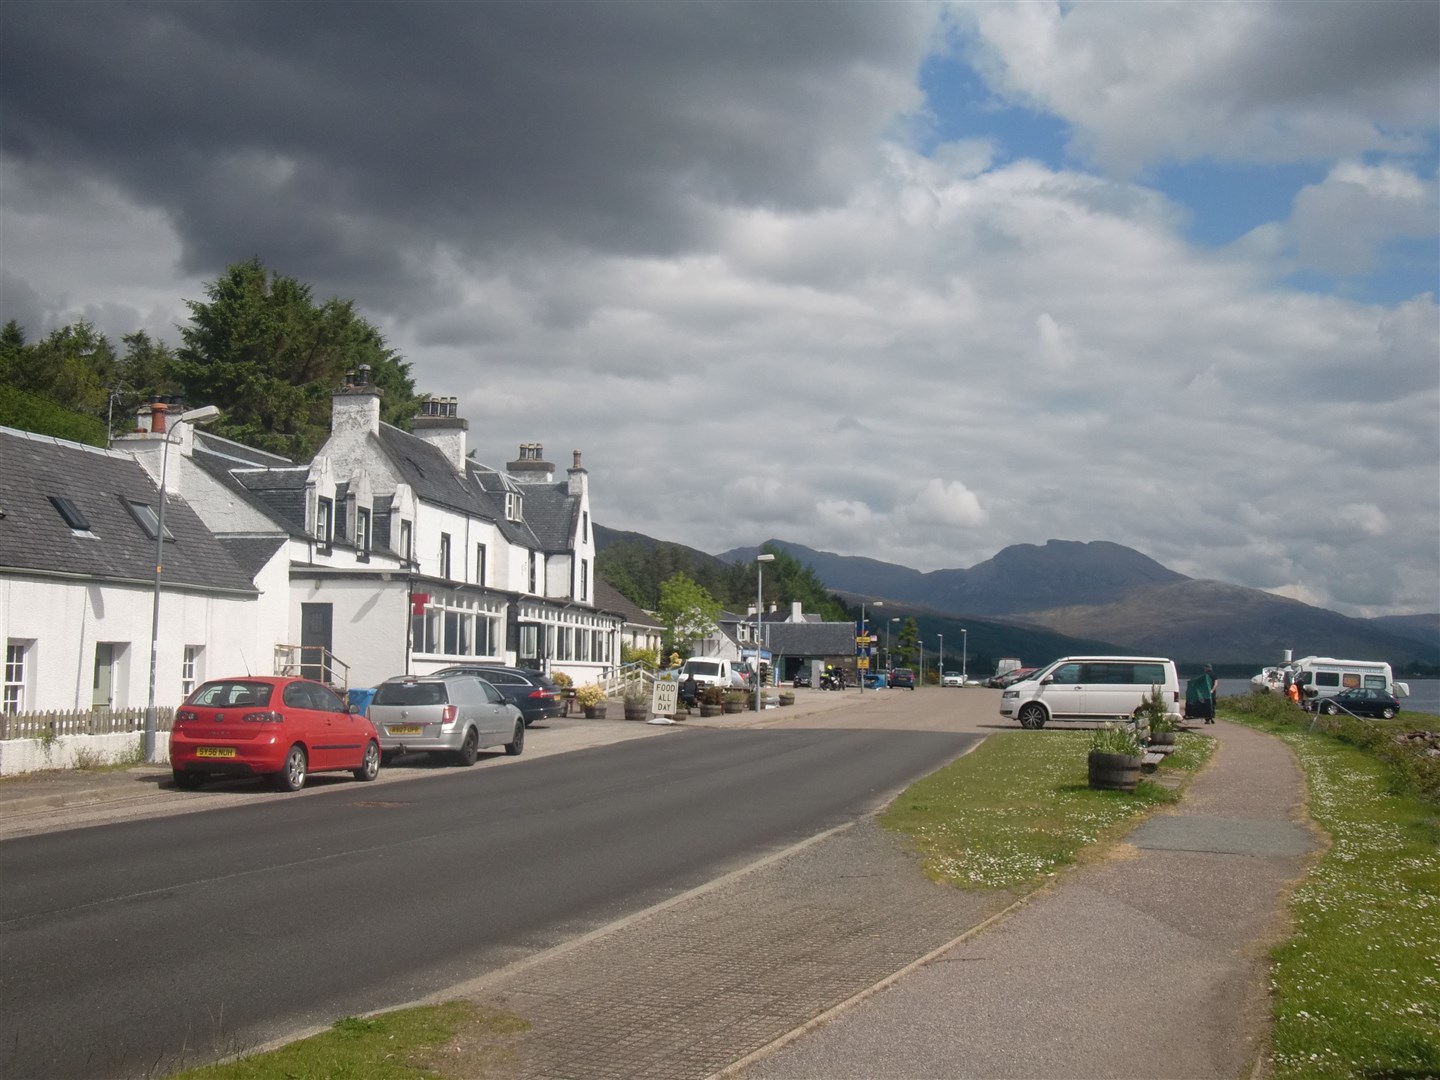 Lochcarron aims to build community resilience.